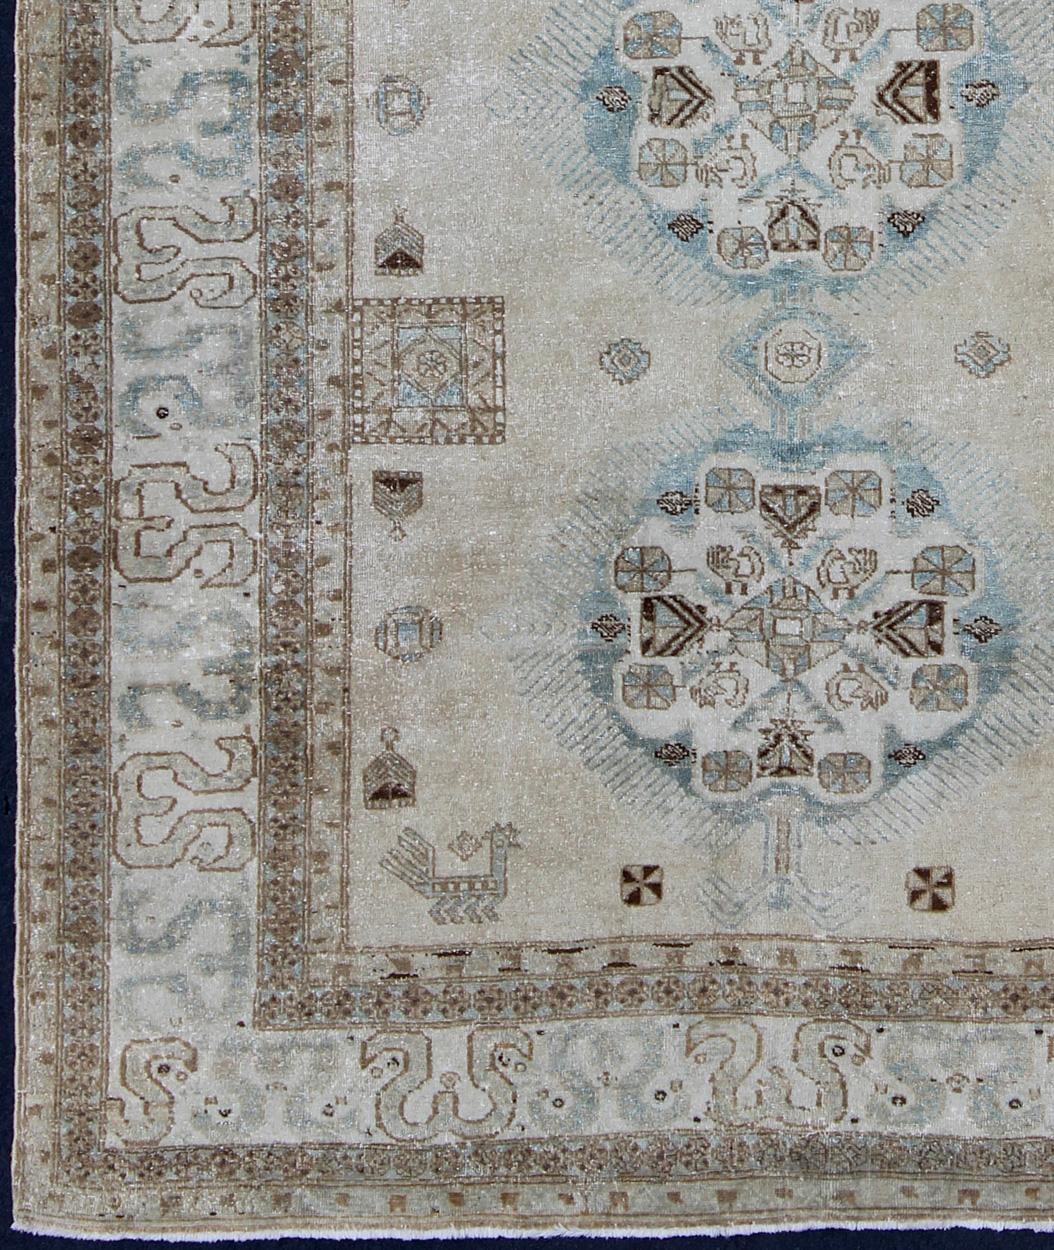 Keivan Woven Arts- Earth Tones and light blue antique Persian Ardebil Tabriz rug with medallions, rug E-1106, country of origin / type: Iran / Tabriz, circa 1930
Antique Persian Tabriz Rug With Three Medallions in Muted Earth Tones, ivory, brown and